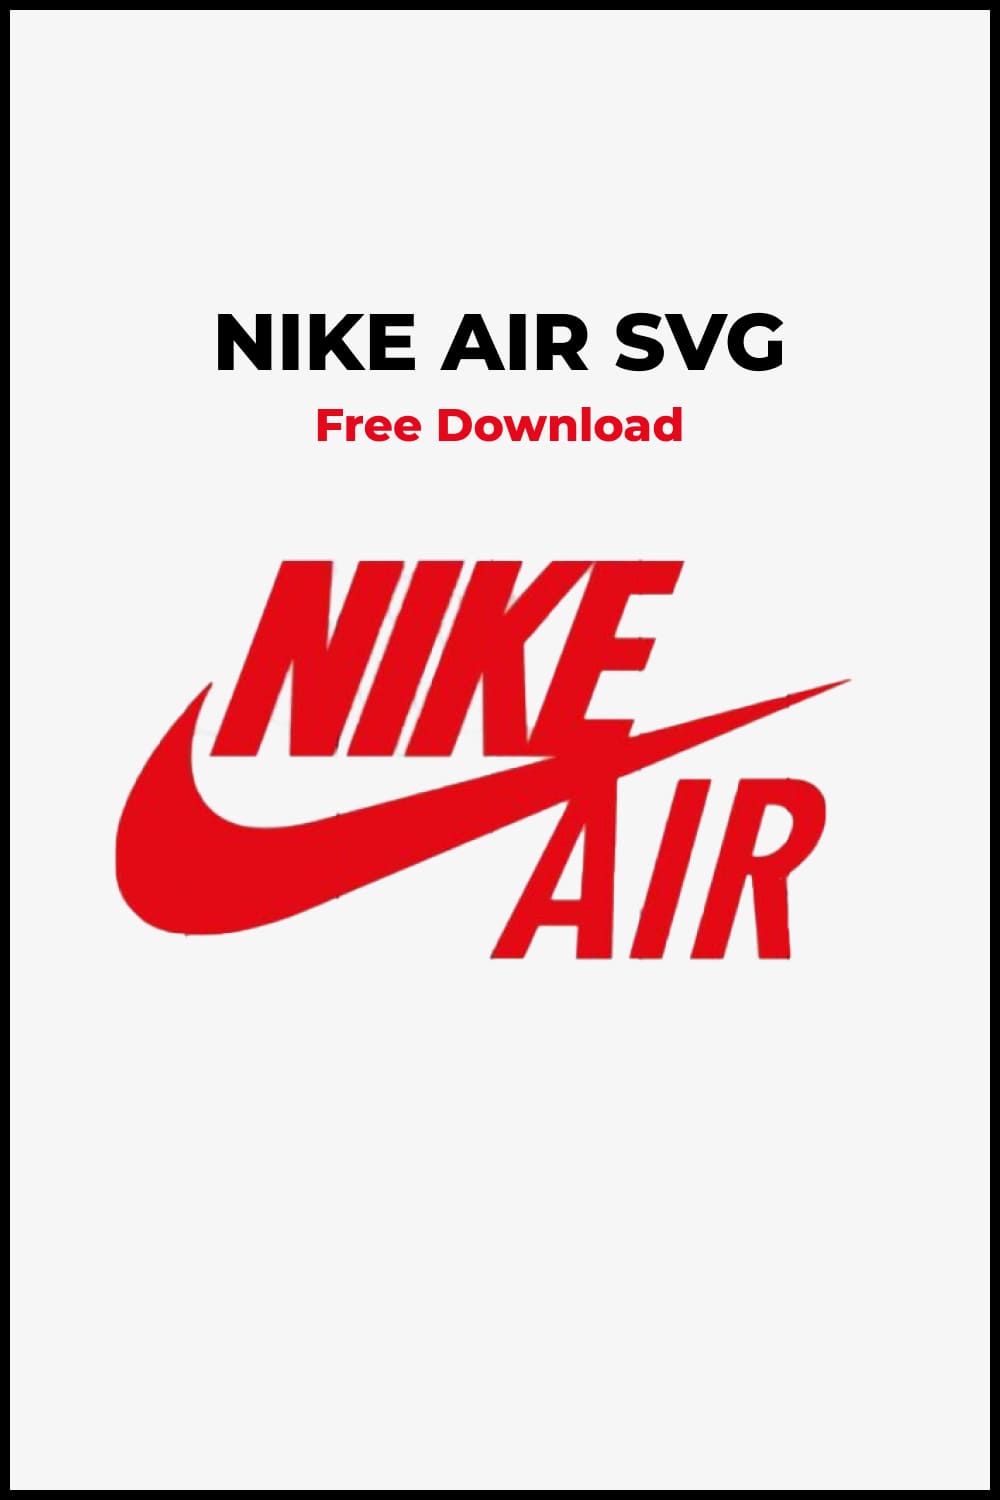 Image of the Nike Air logo in red.